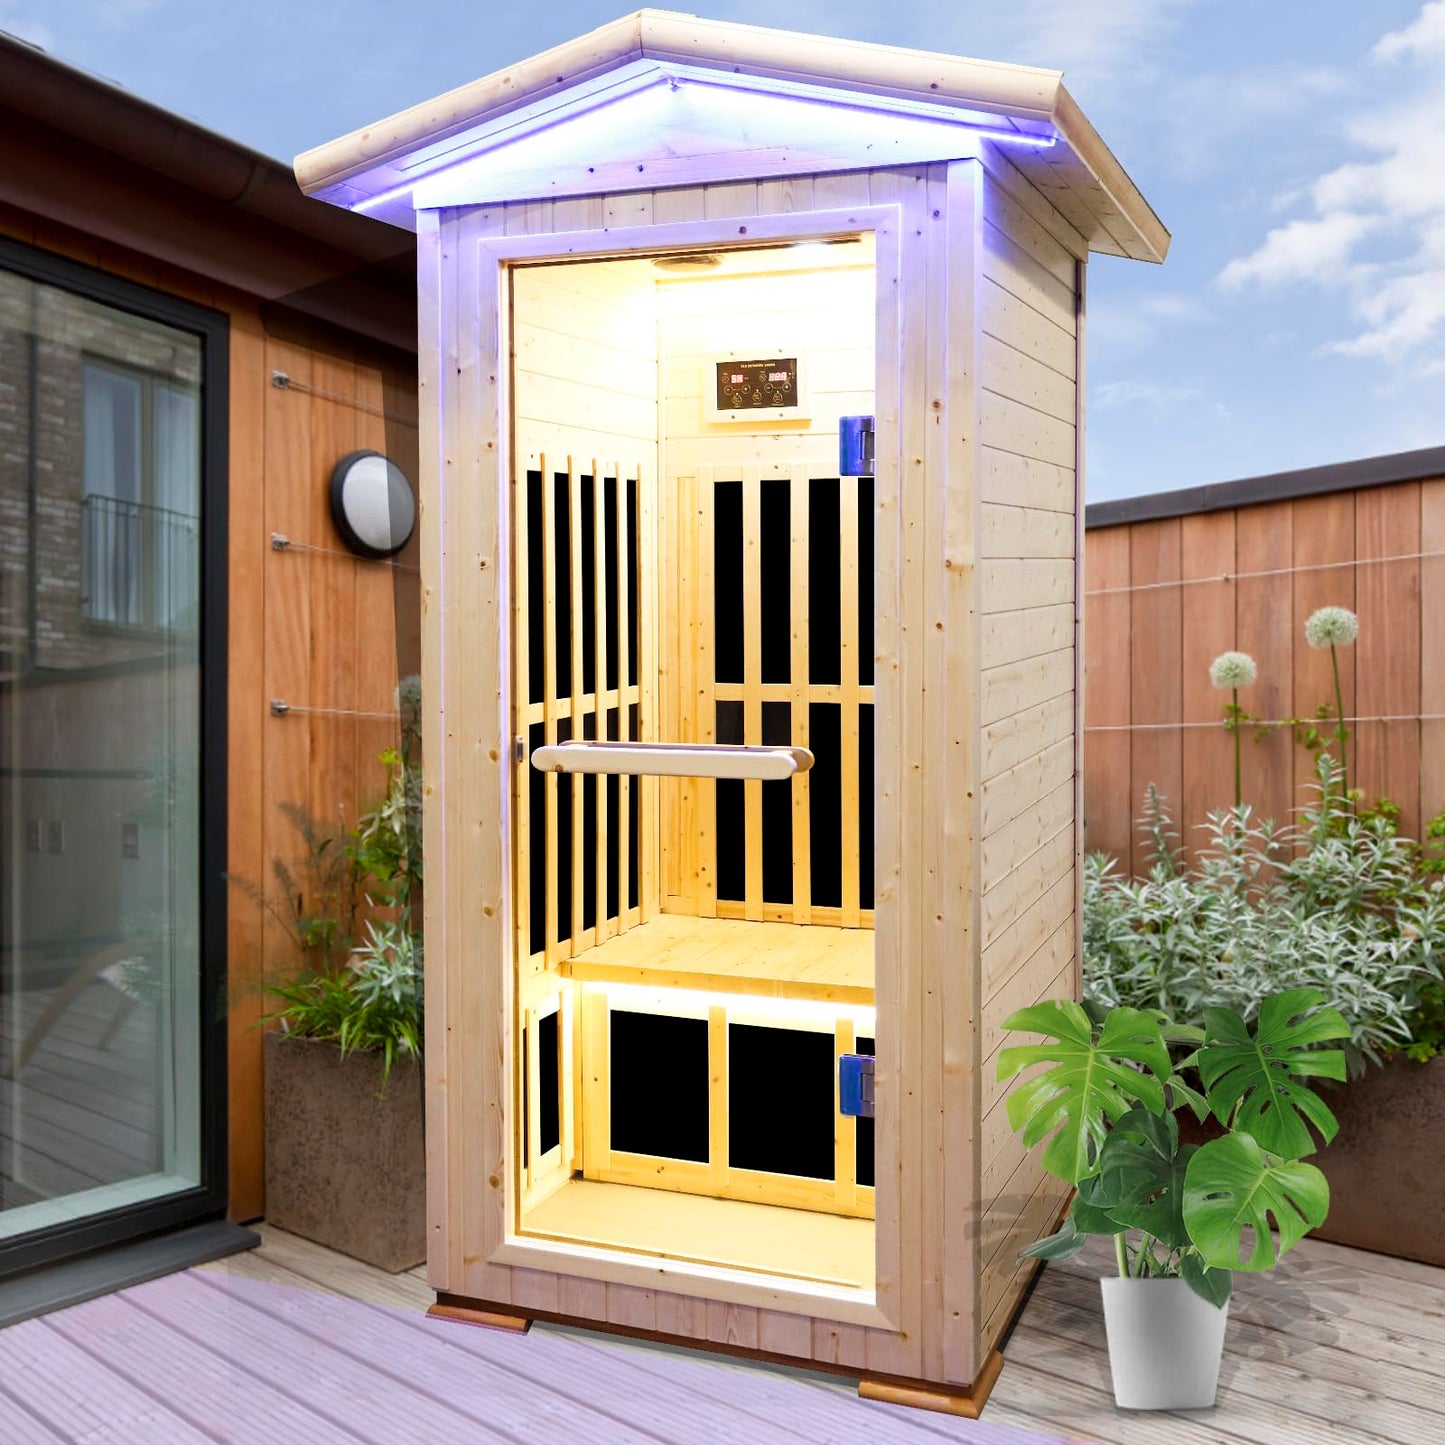 OUTEXER Outdoor Far Infrared Sauna Wooden Saunas Spa 1300W Low-EMF Dry Sauna Room for One Person Finland Spruce Wood